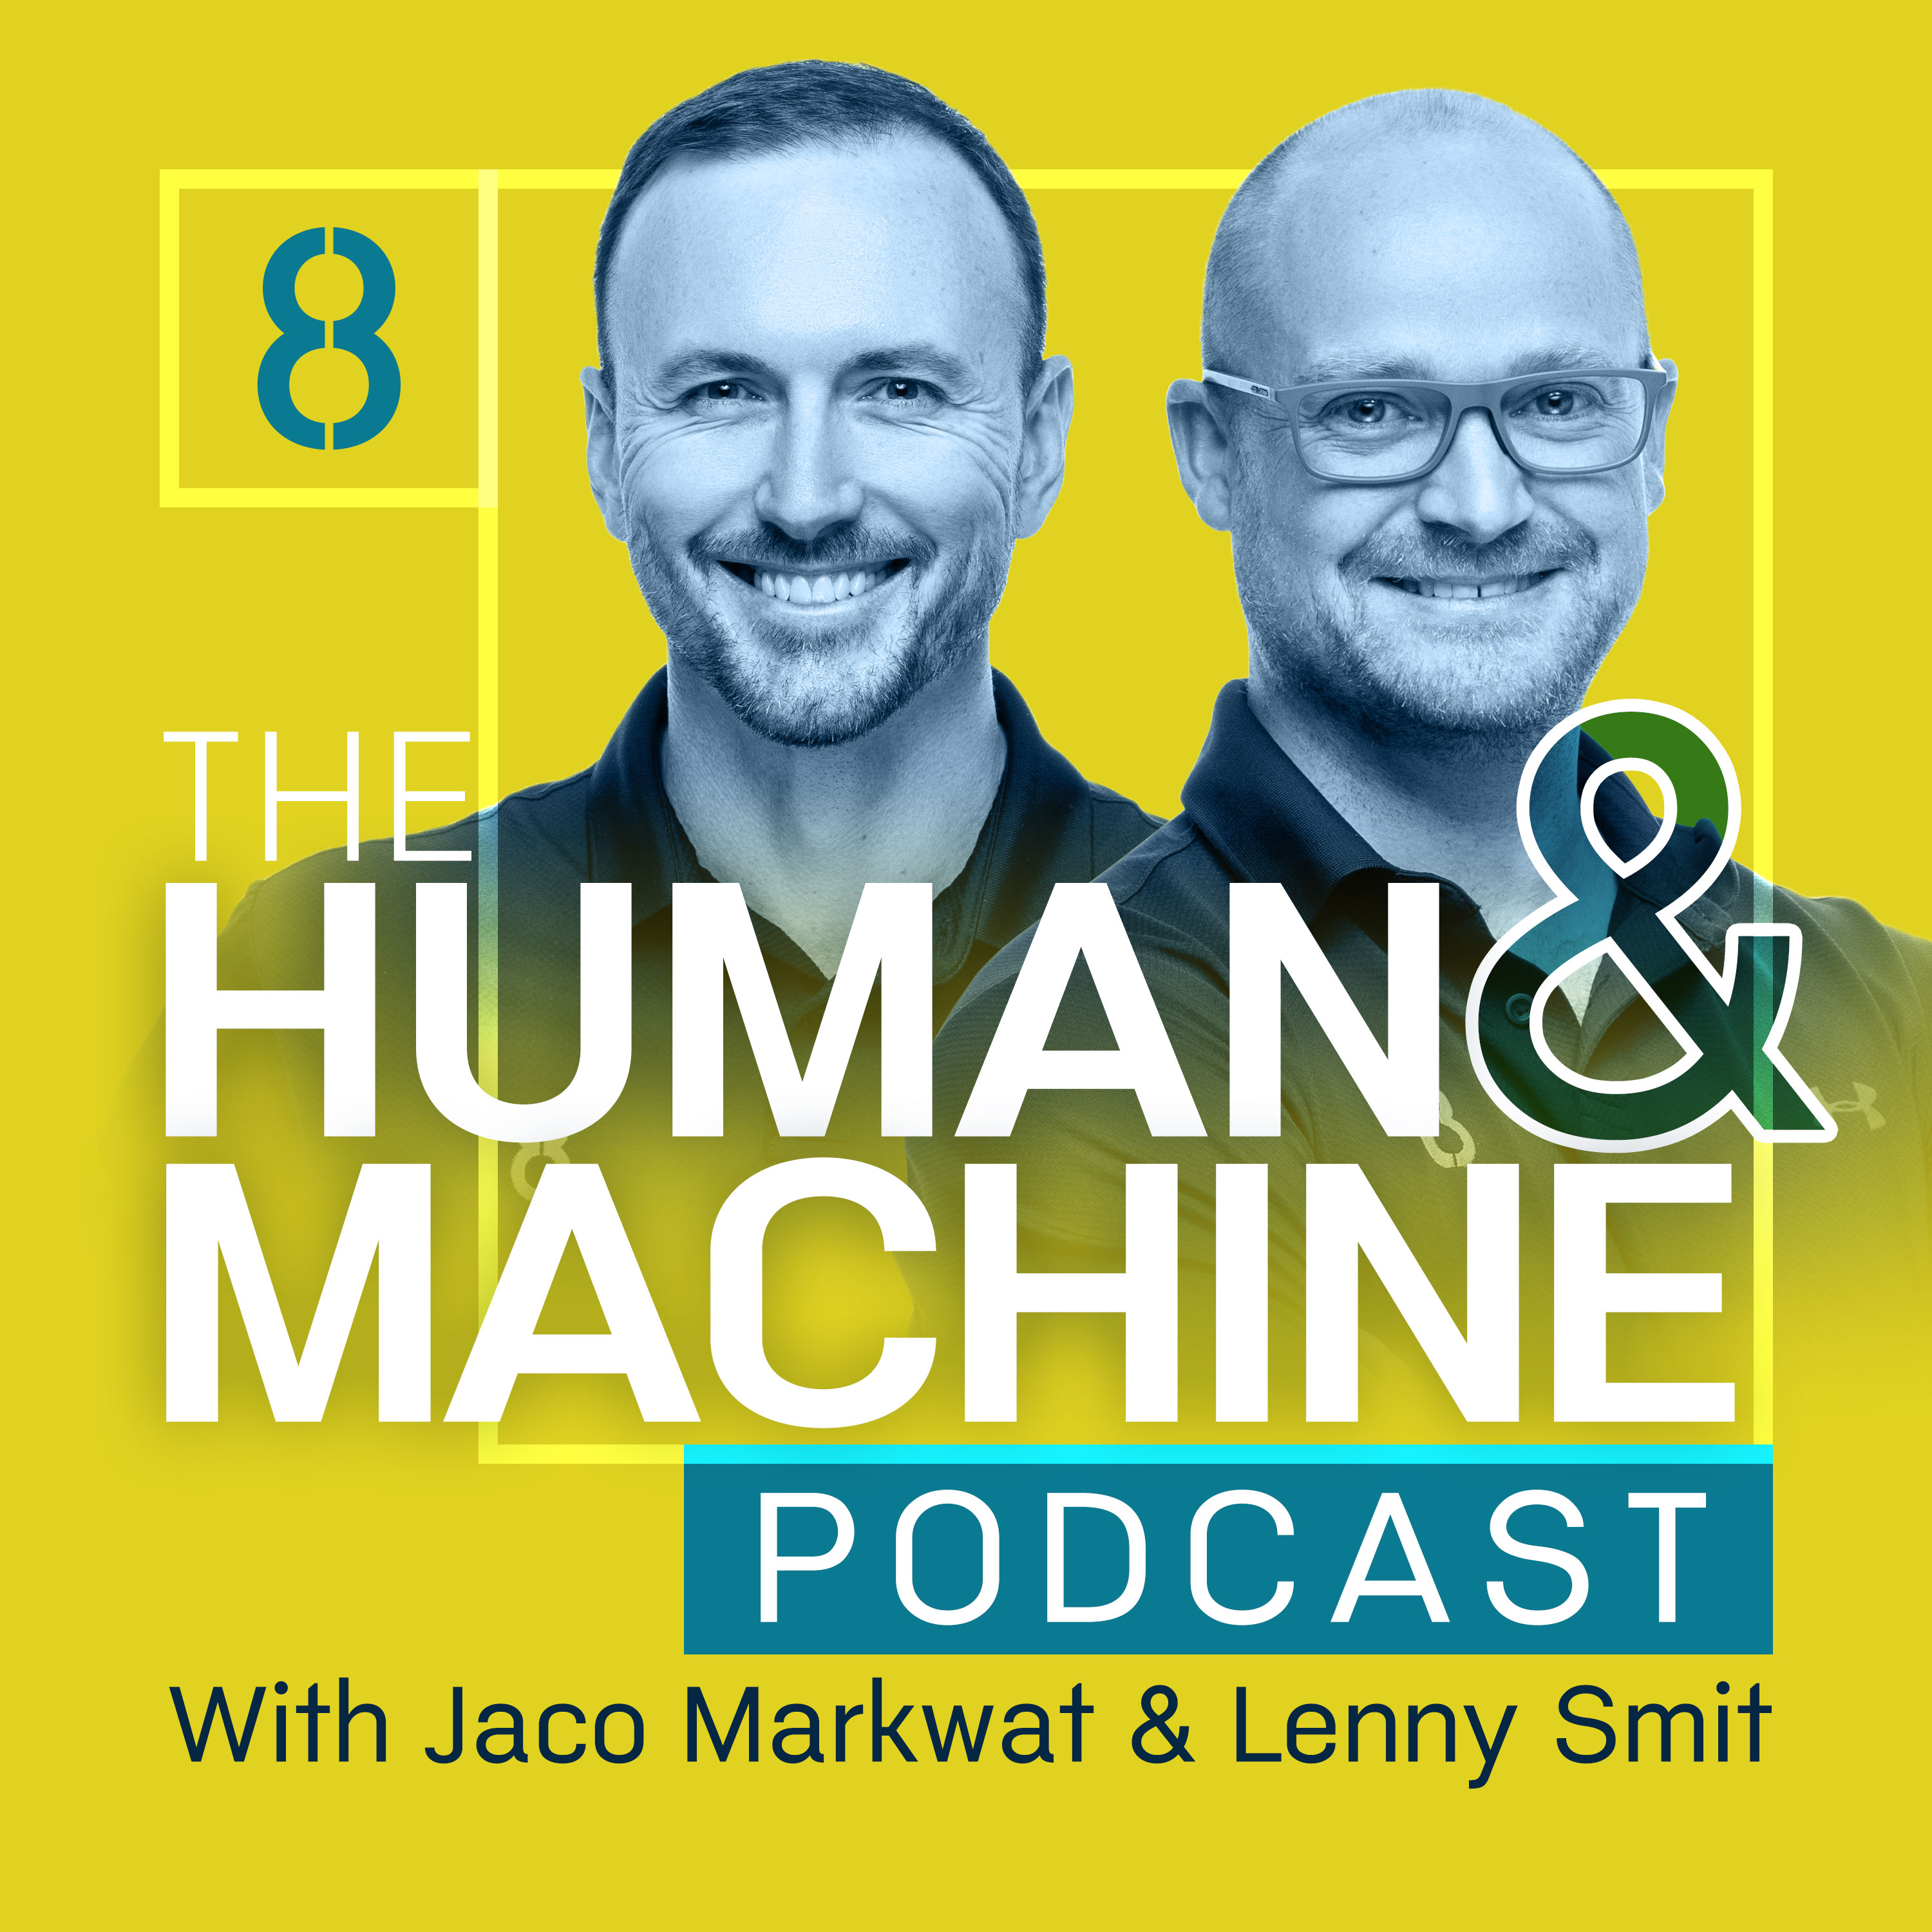 The Human and Machine Podcast